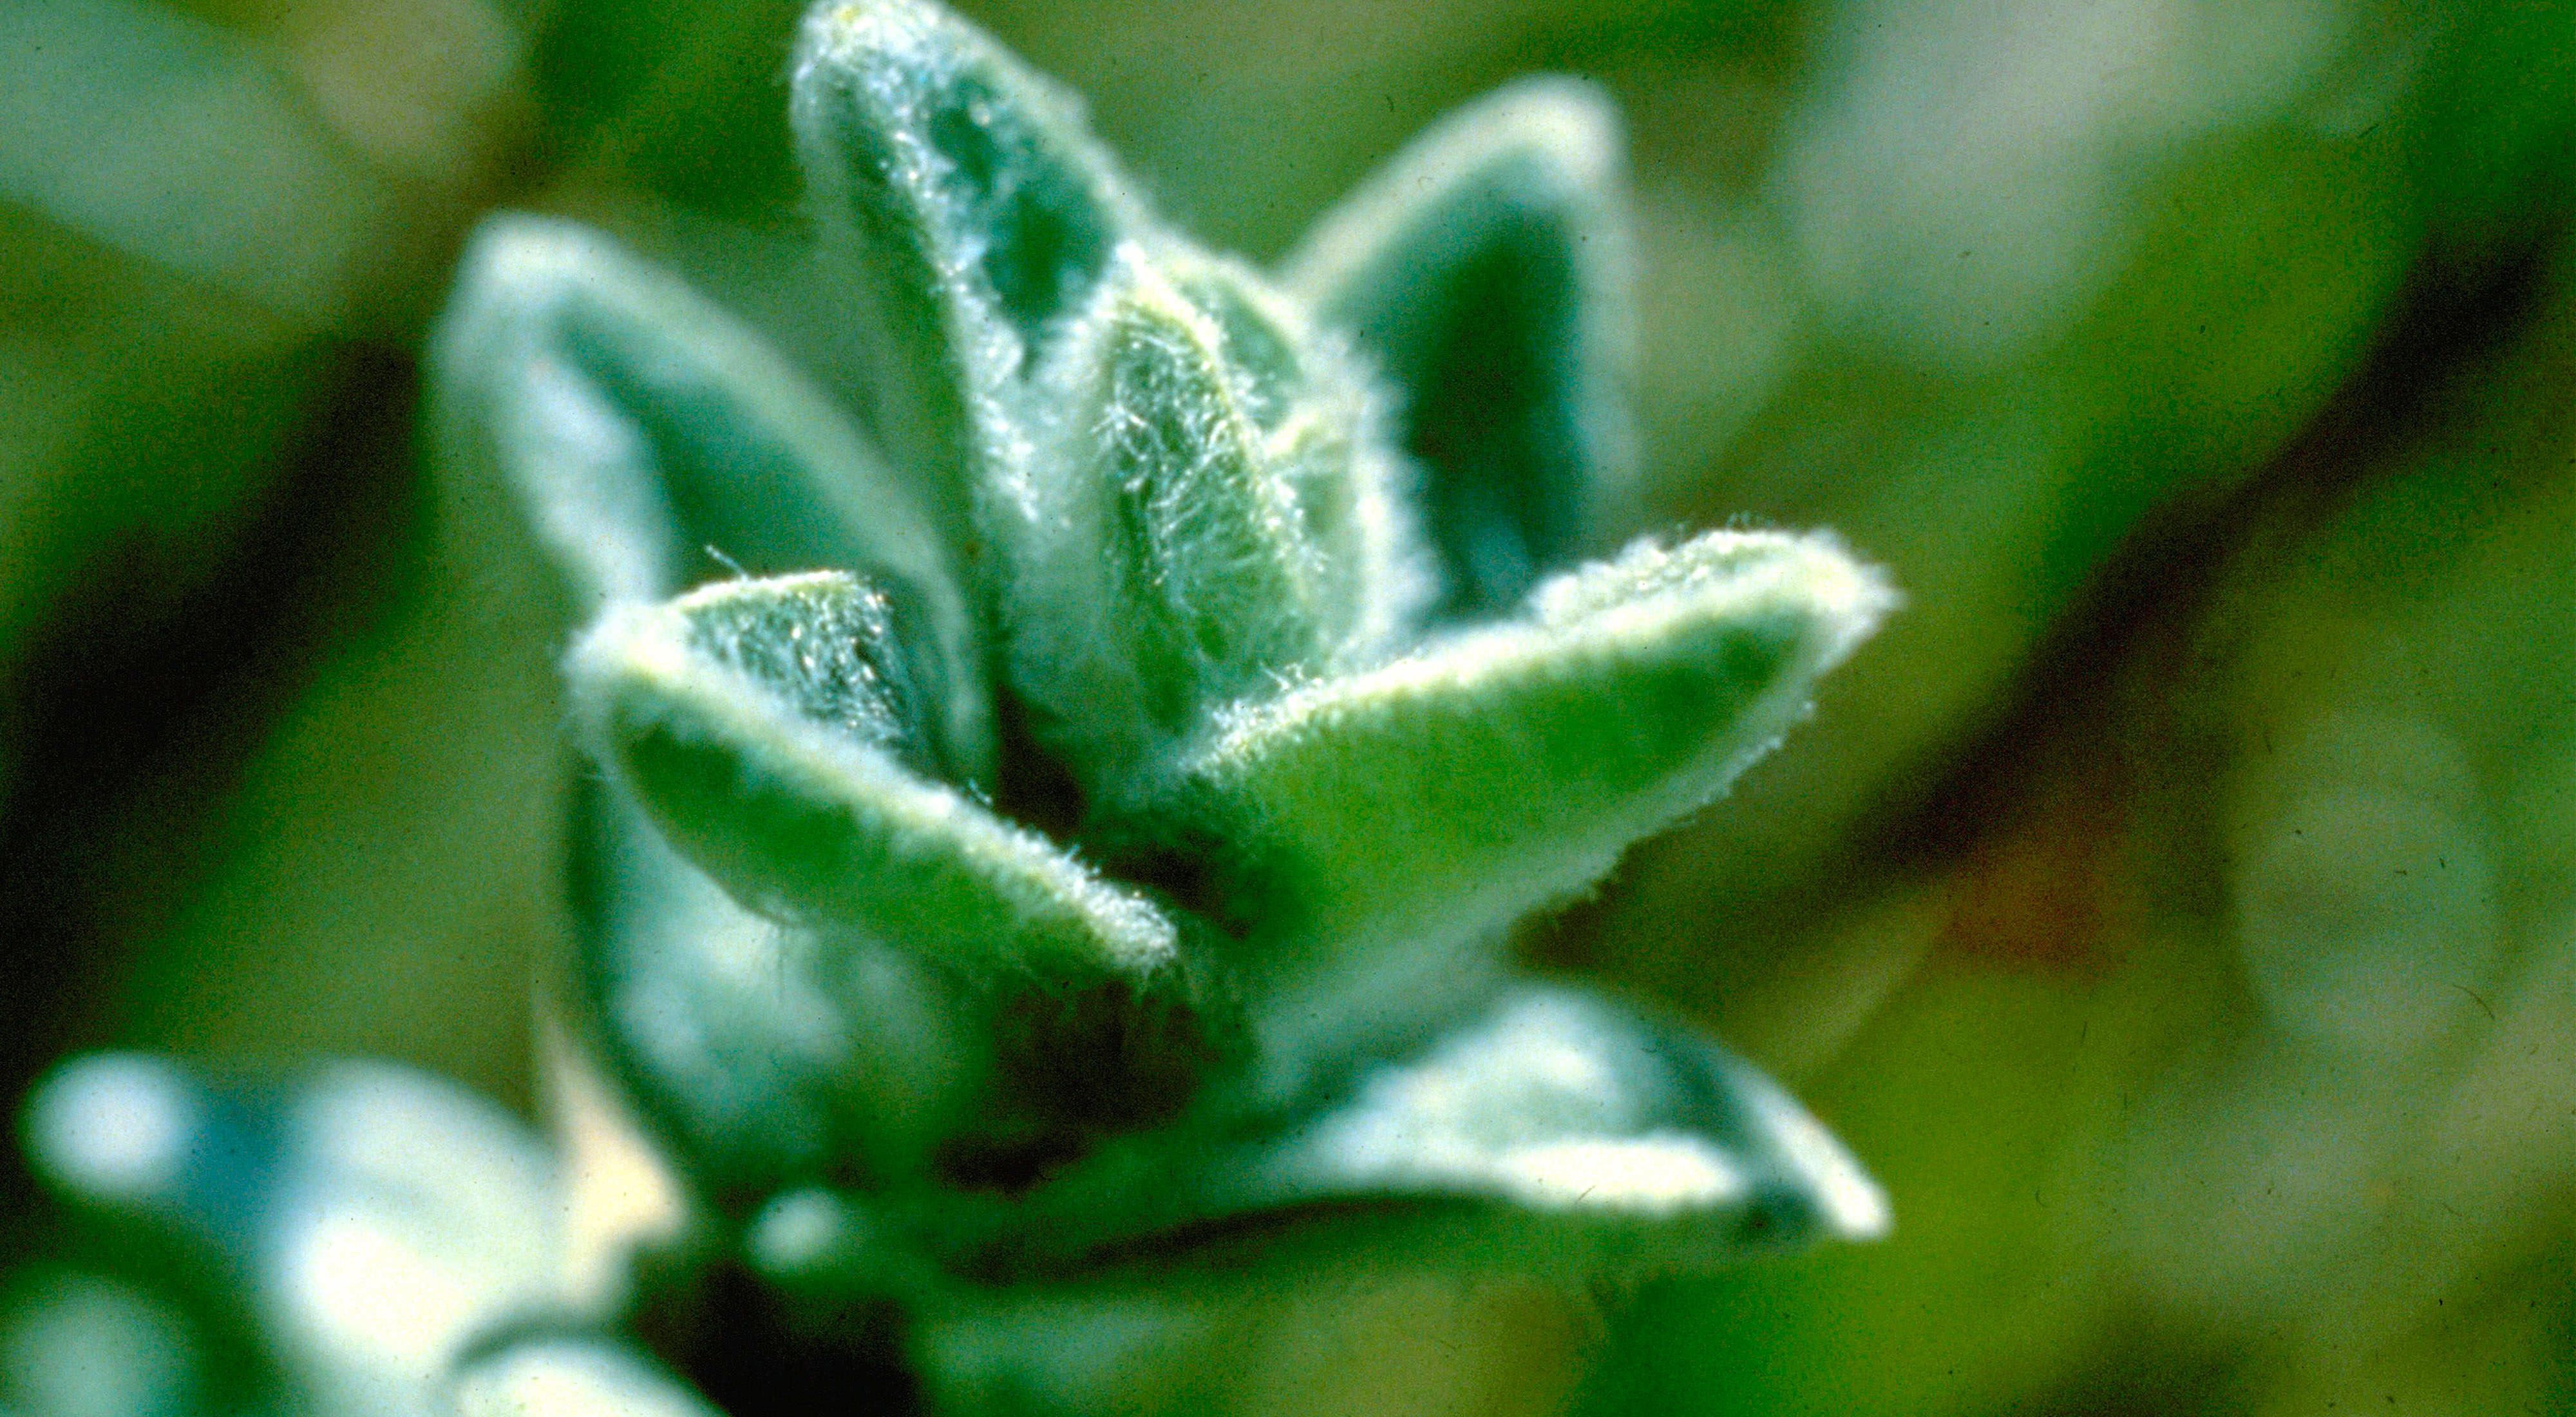 Close up view of a green plant with five fuzzy leaves beginning to open up in bloom.